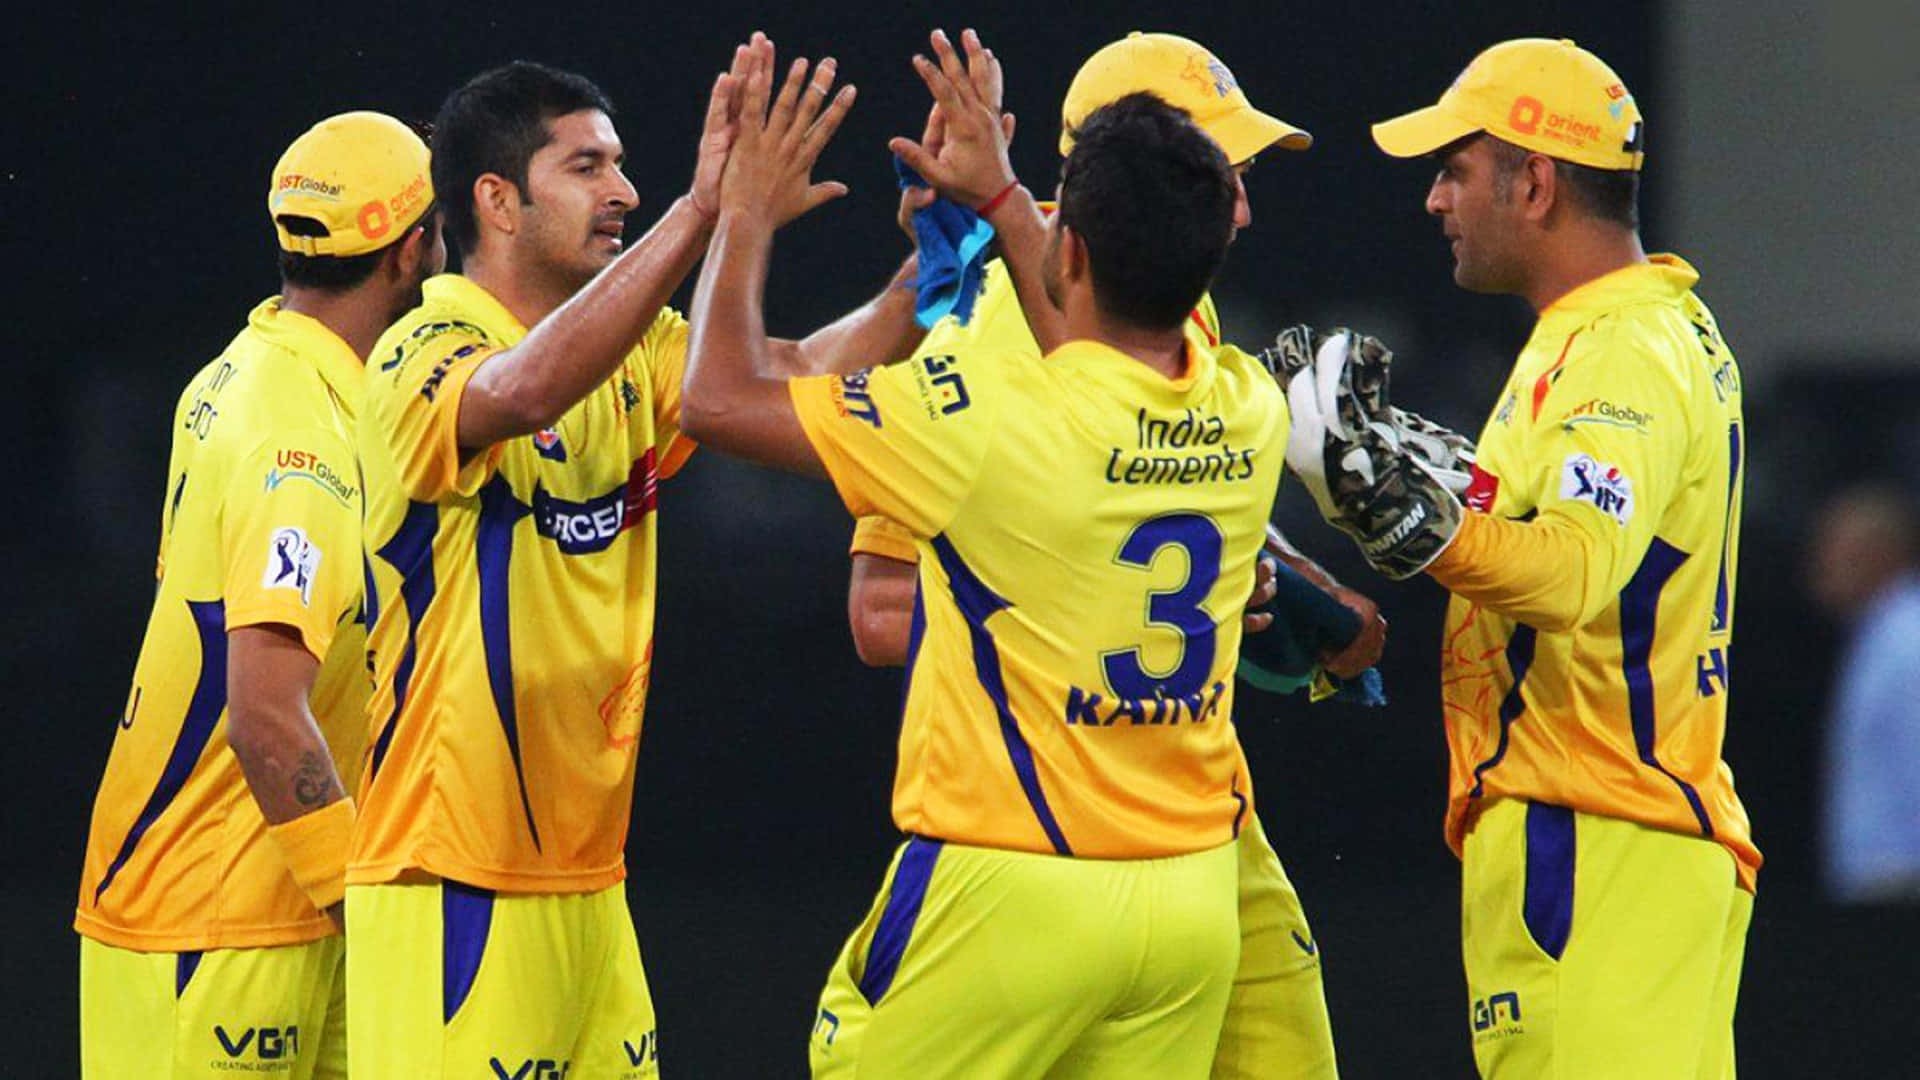 Chennai Super Kings team celebrating victory on the field